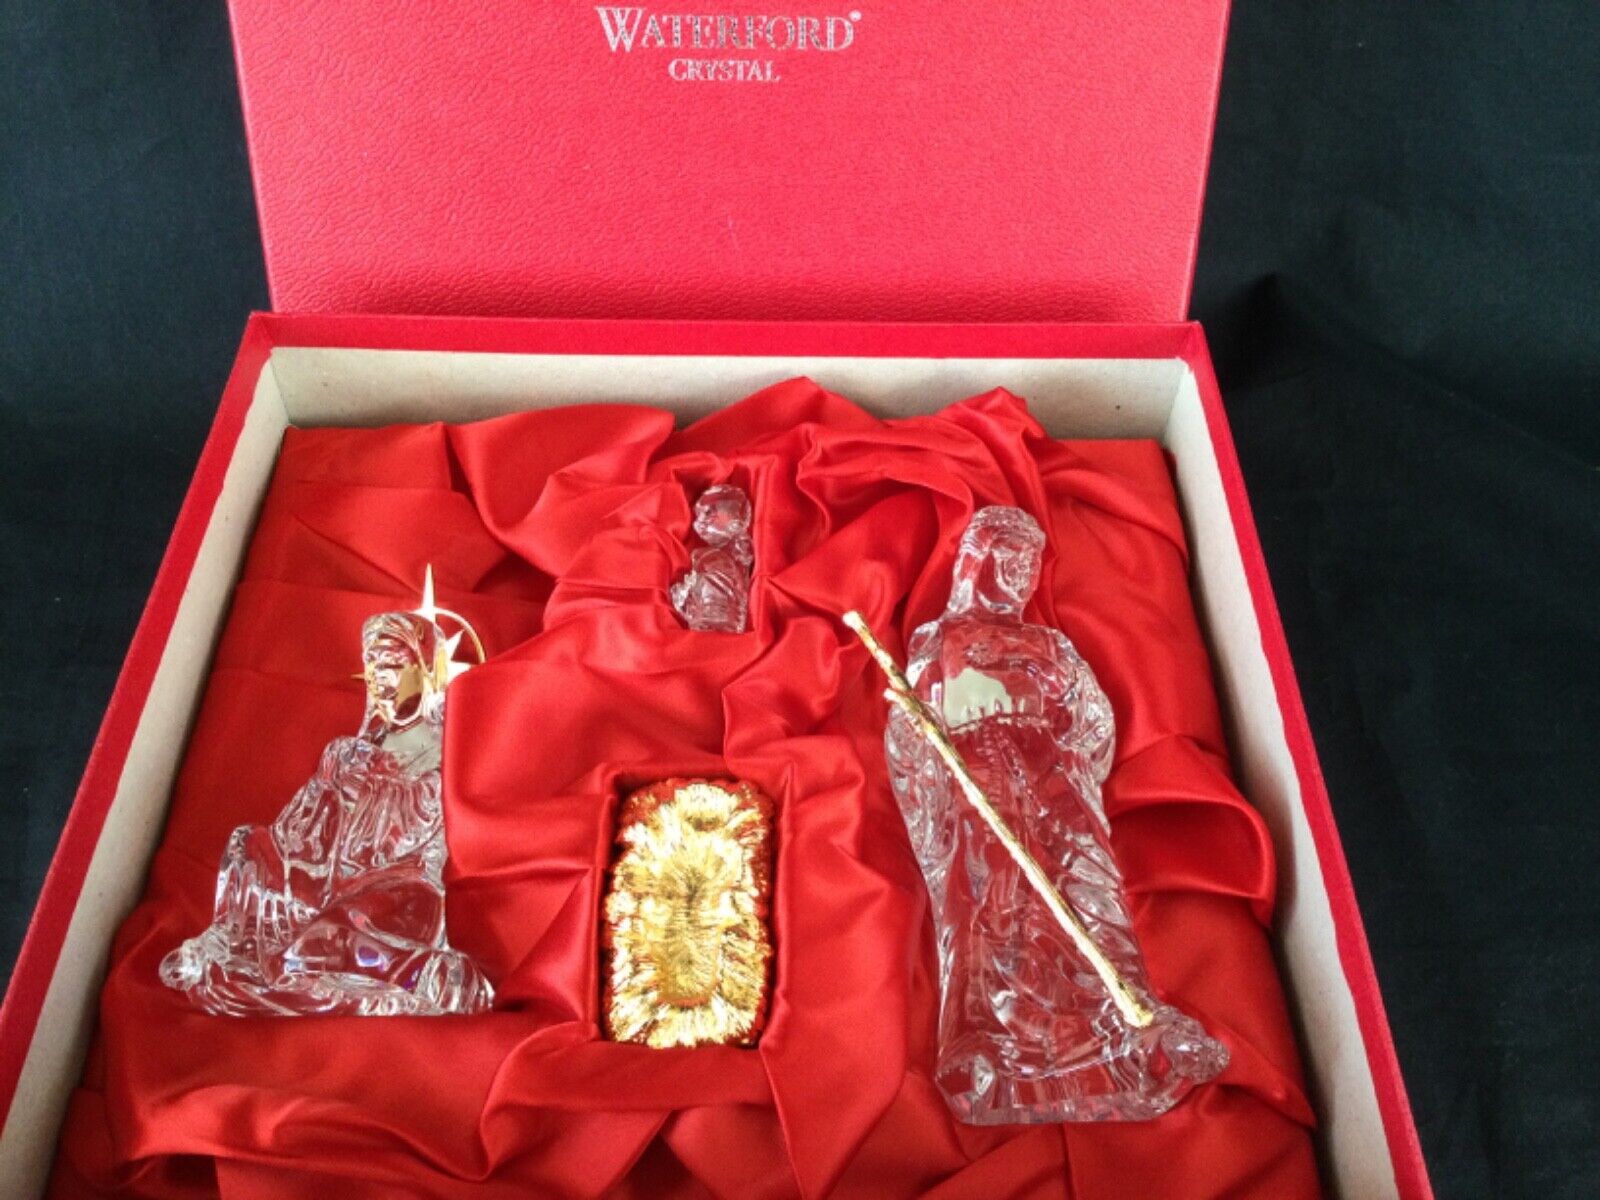 NEW IN BOX * Waterford Crystal Millennium Nativity Set with Gold Accent